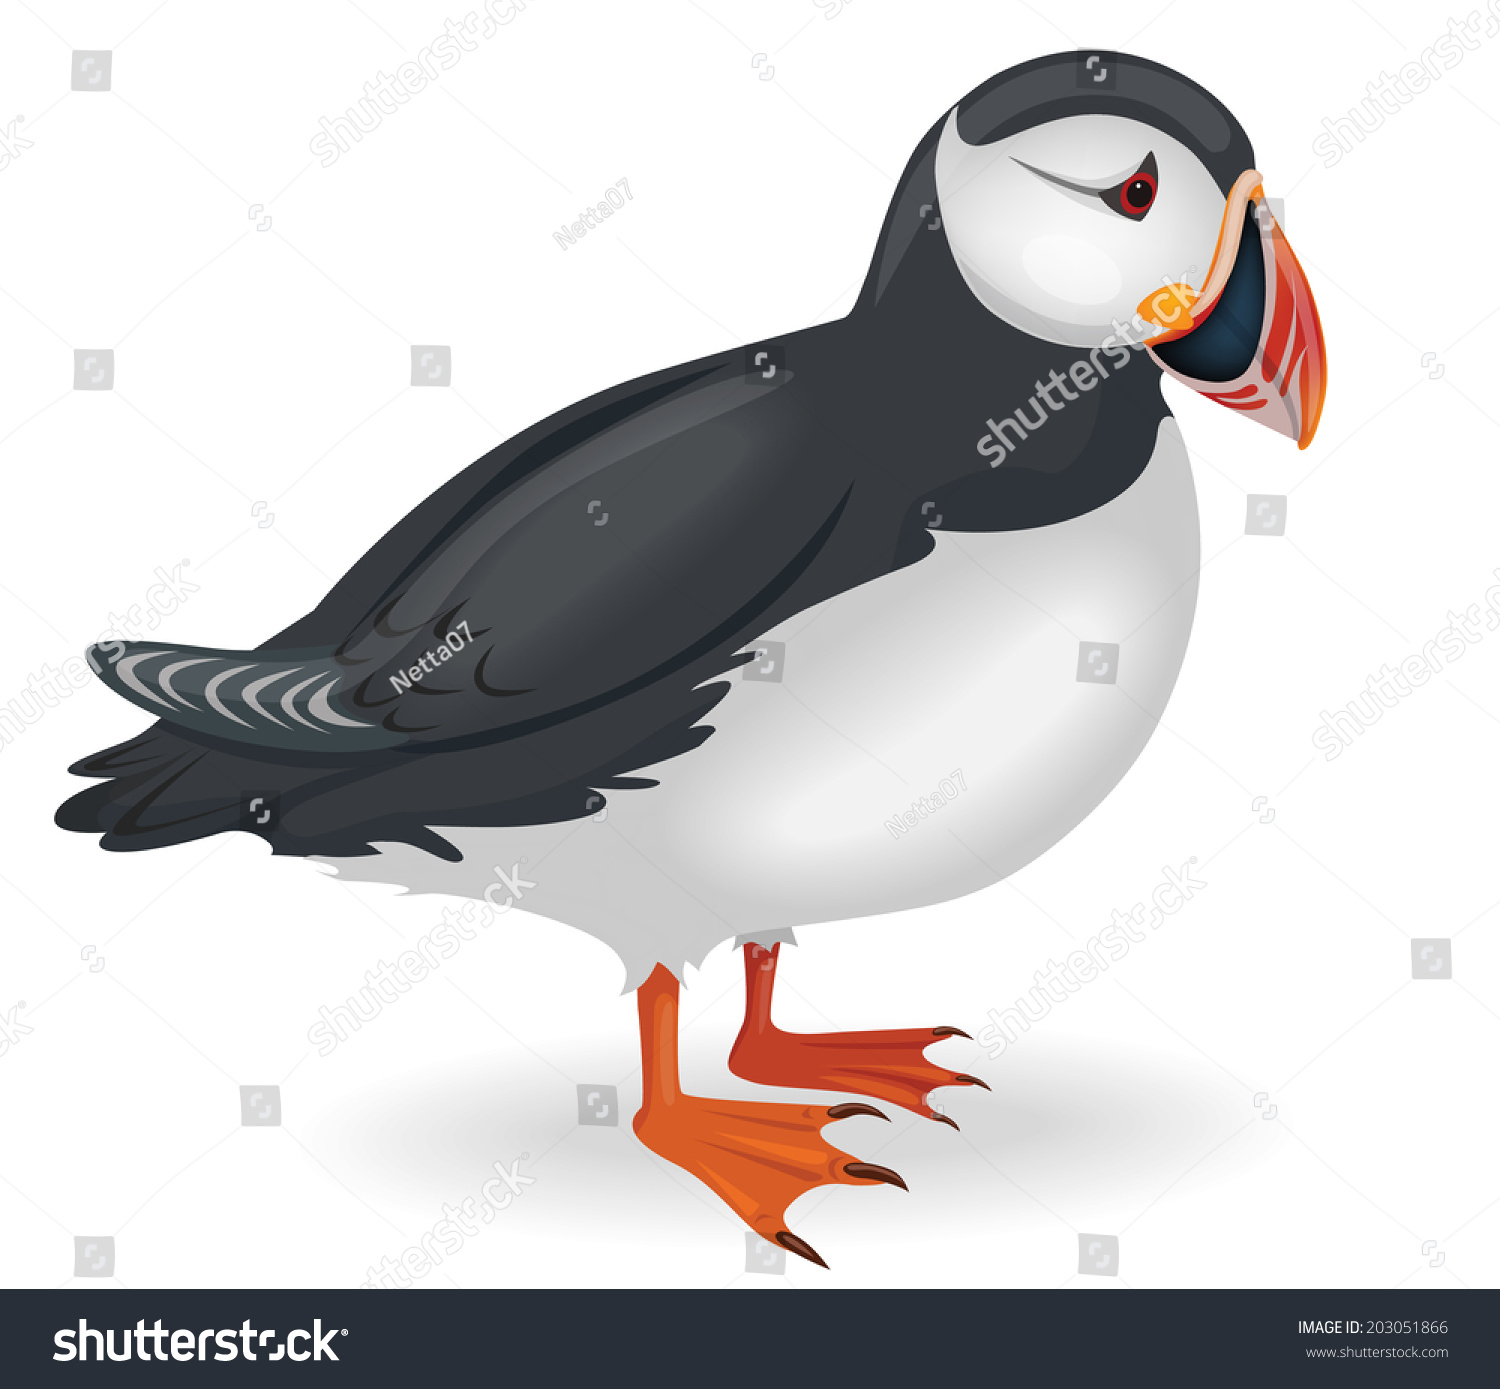 SVG of Vector illustration of a puffin svg